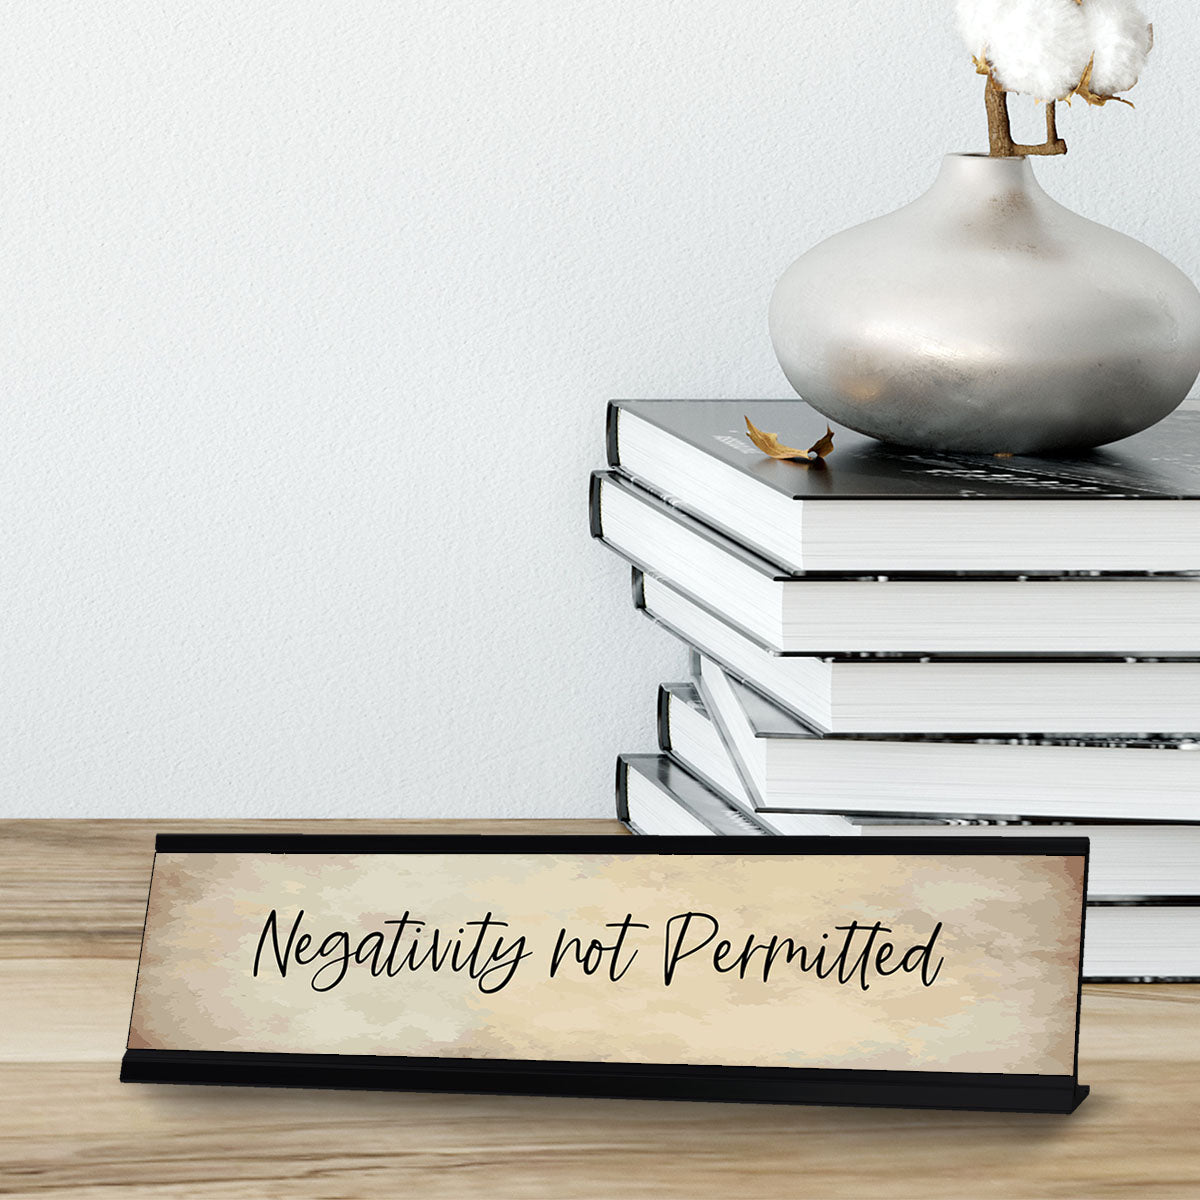 Negativity not Permitted, Motivational Desk Sign (2 x 8")